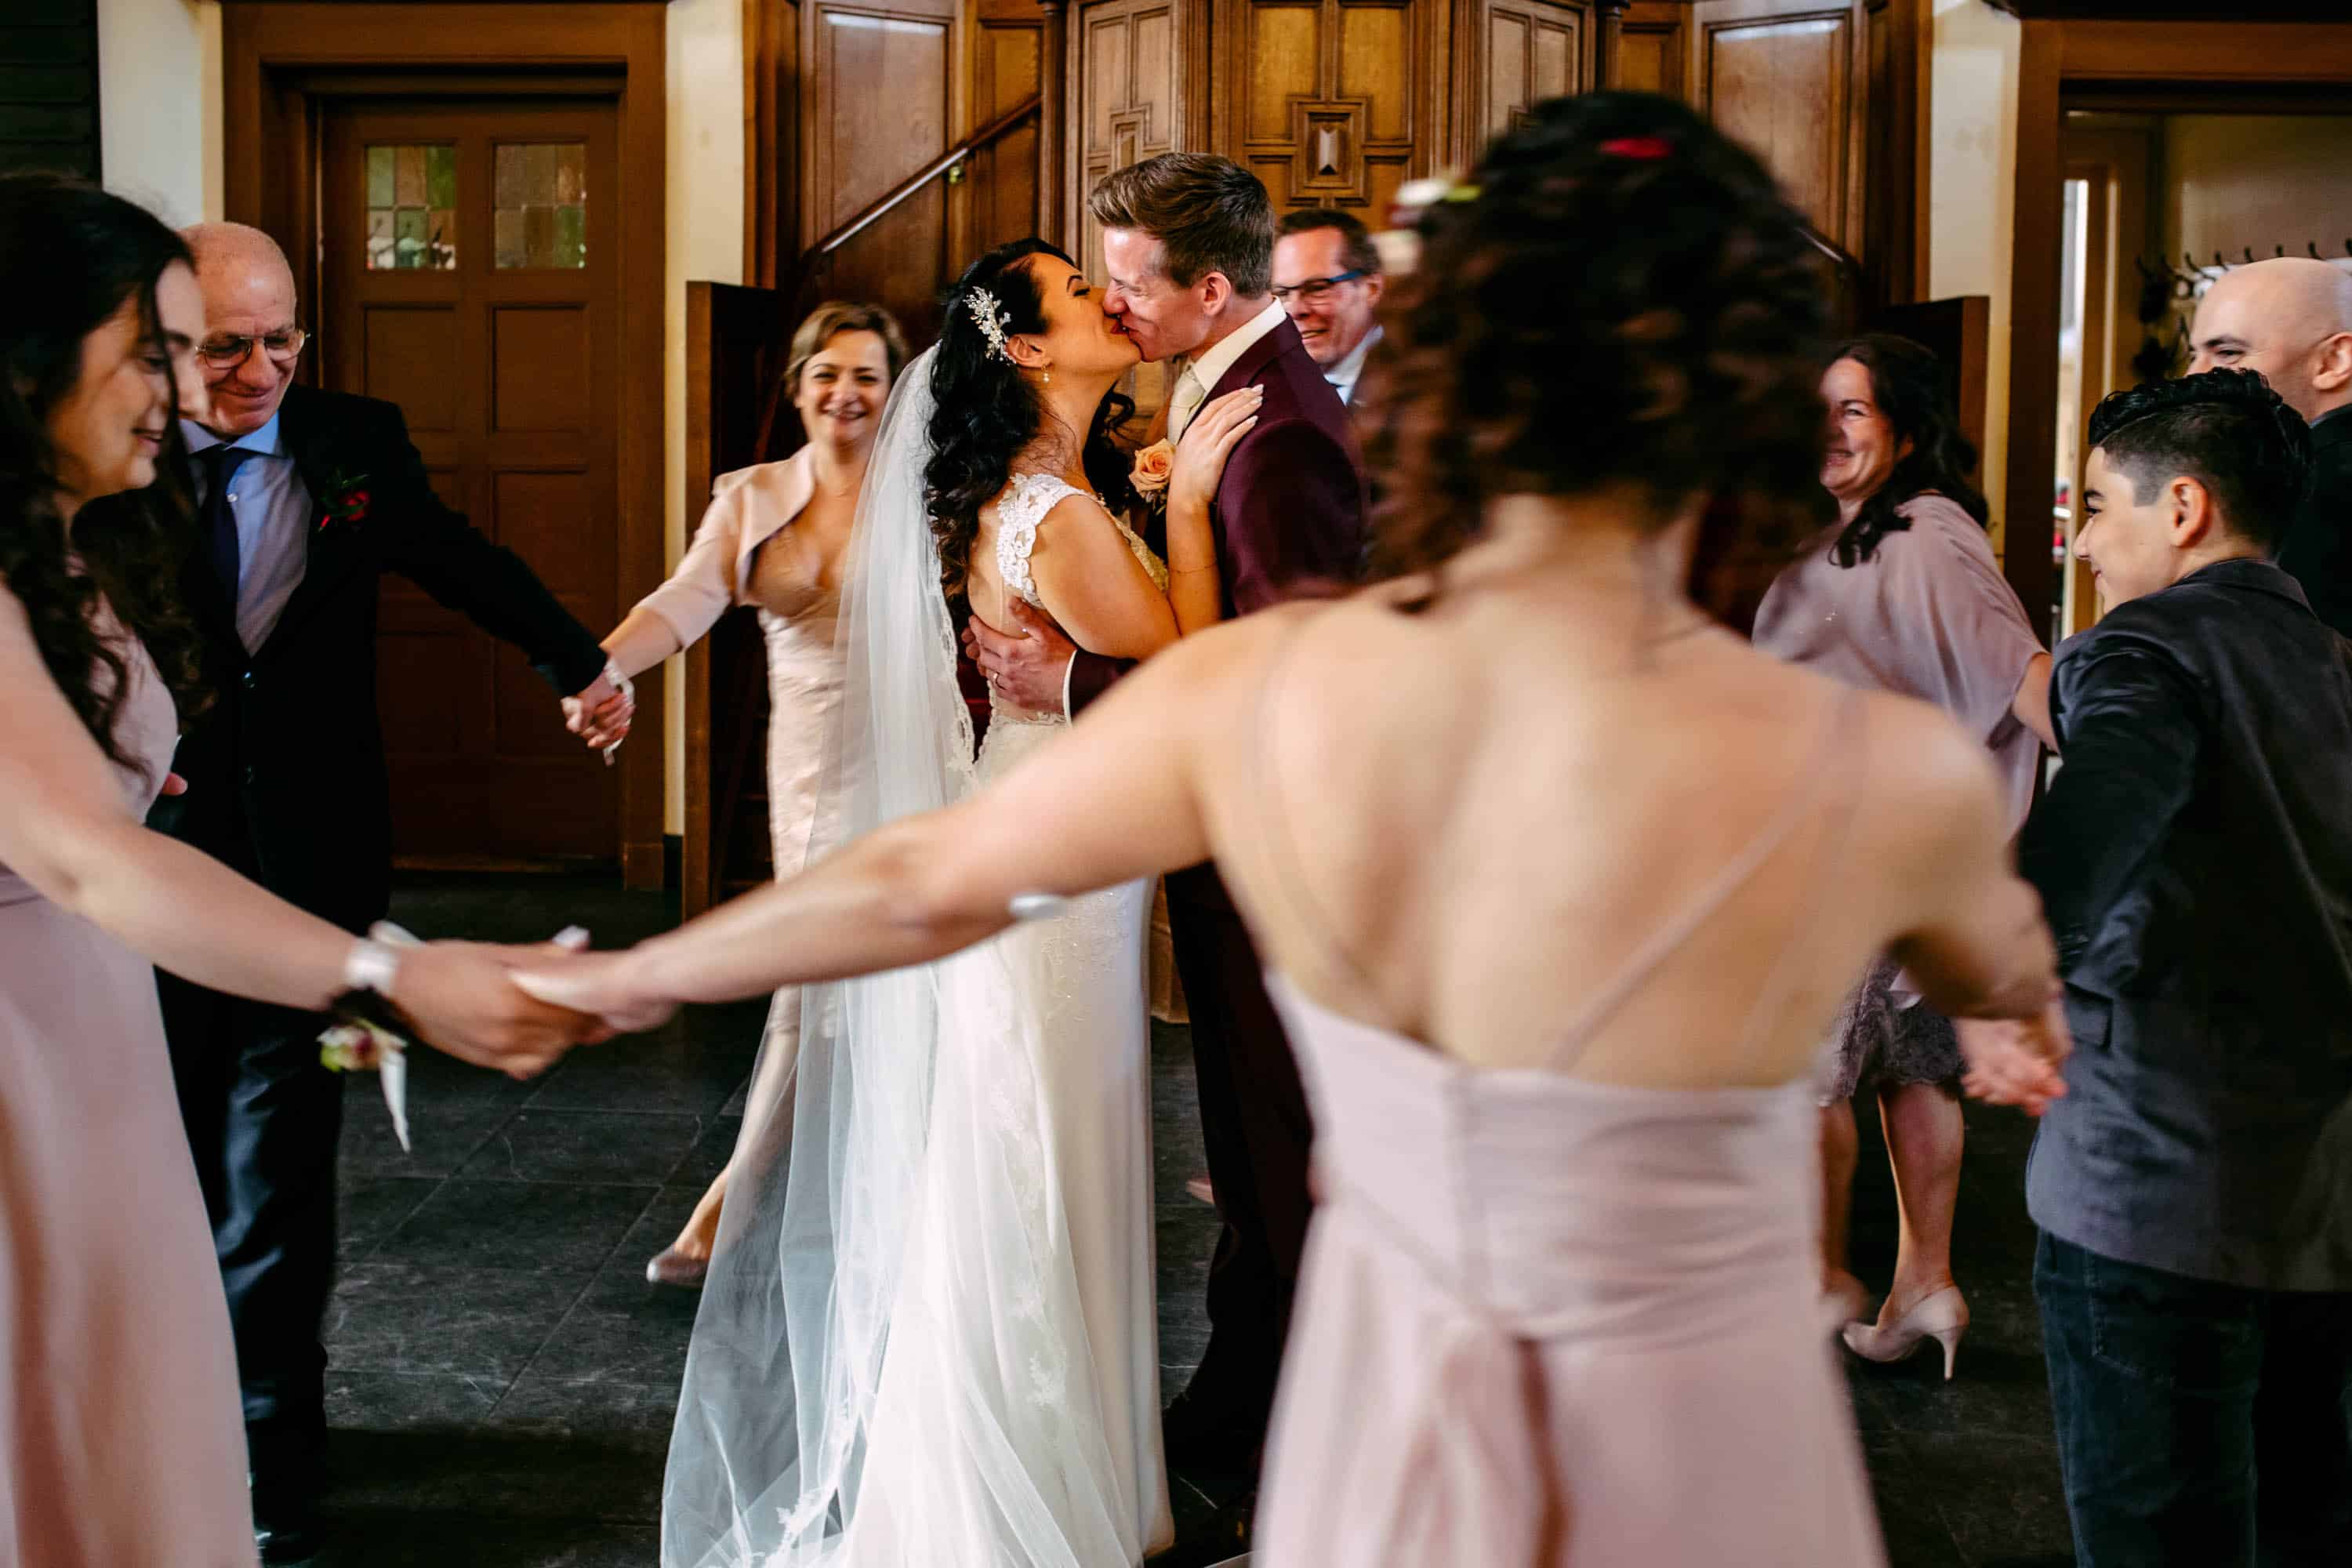 A bride and groom dance in a room with other people.